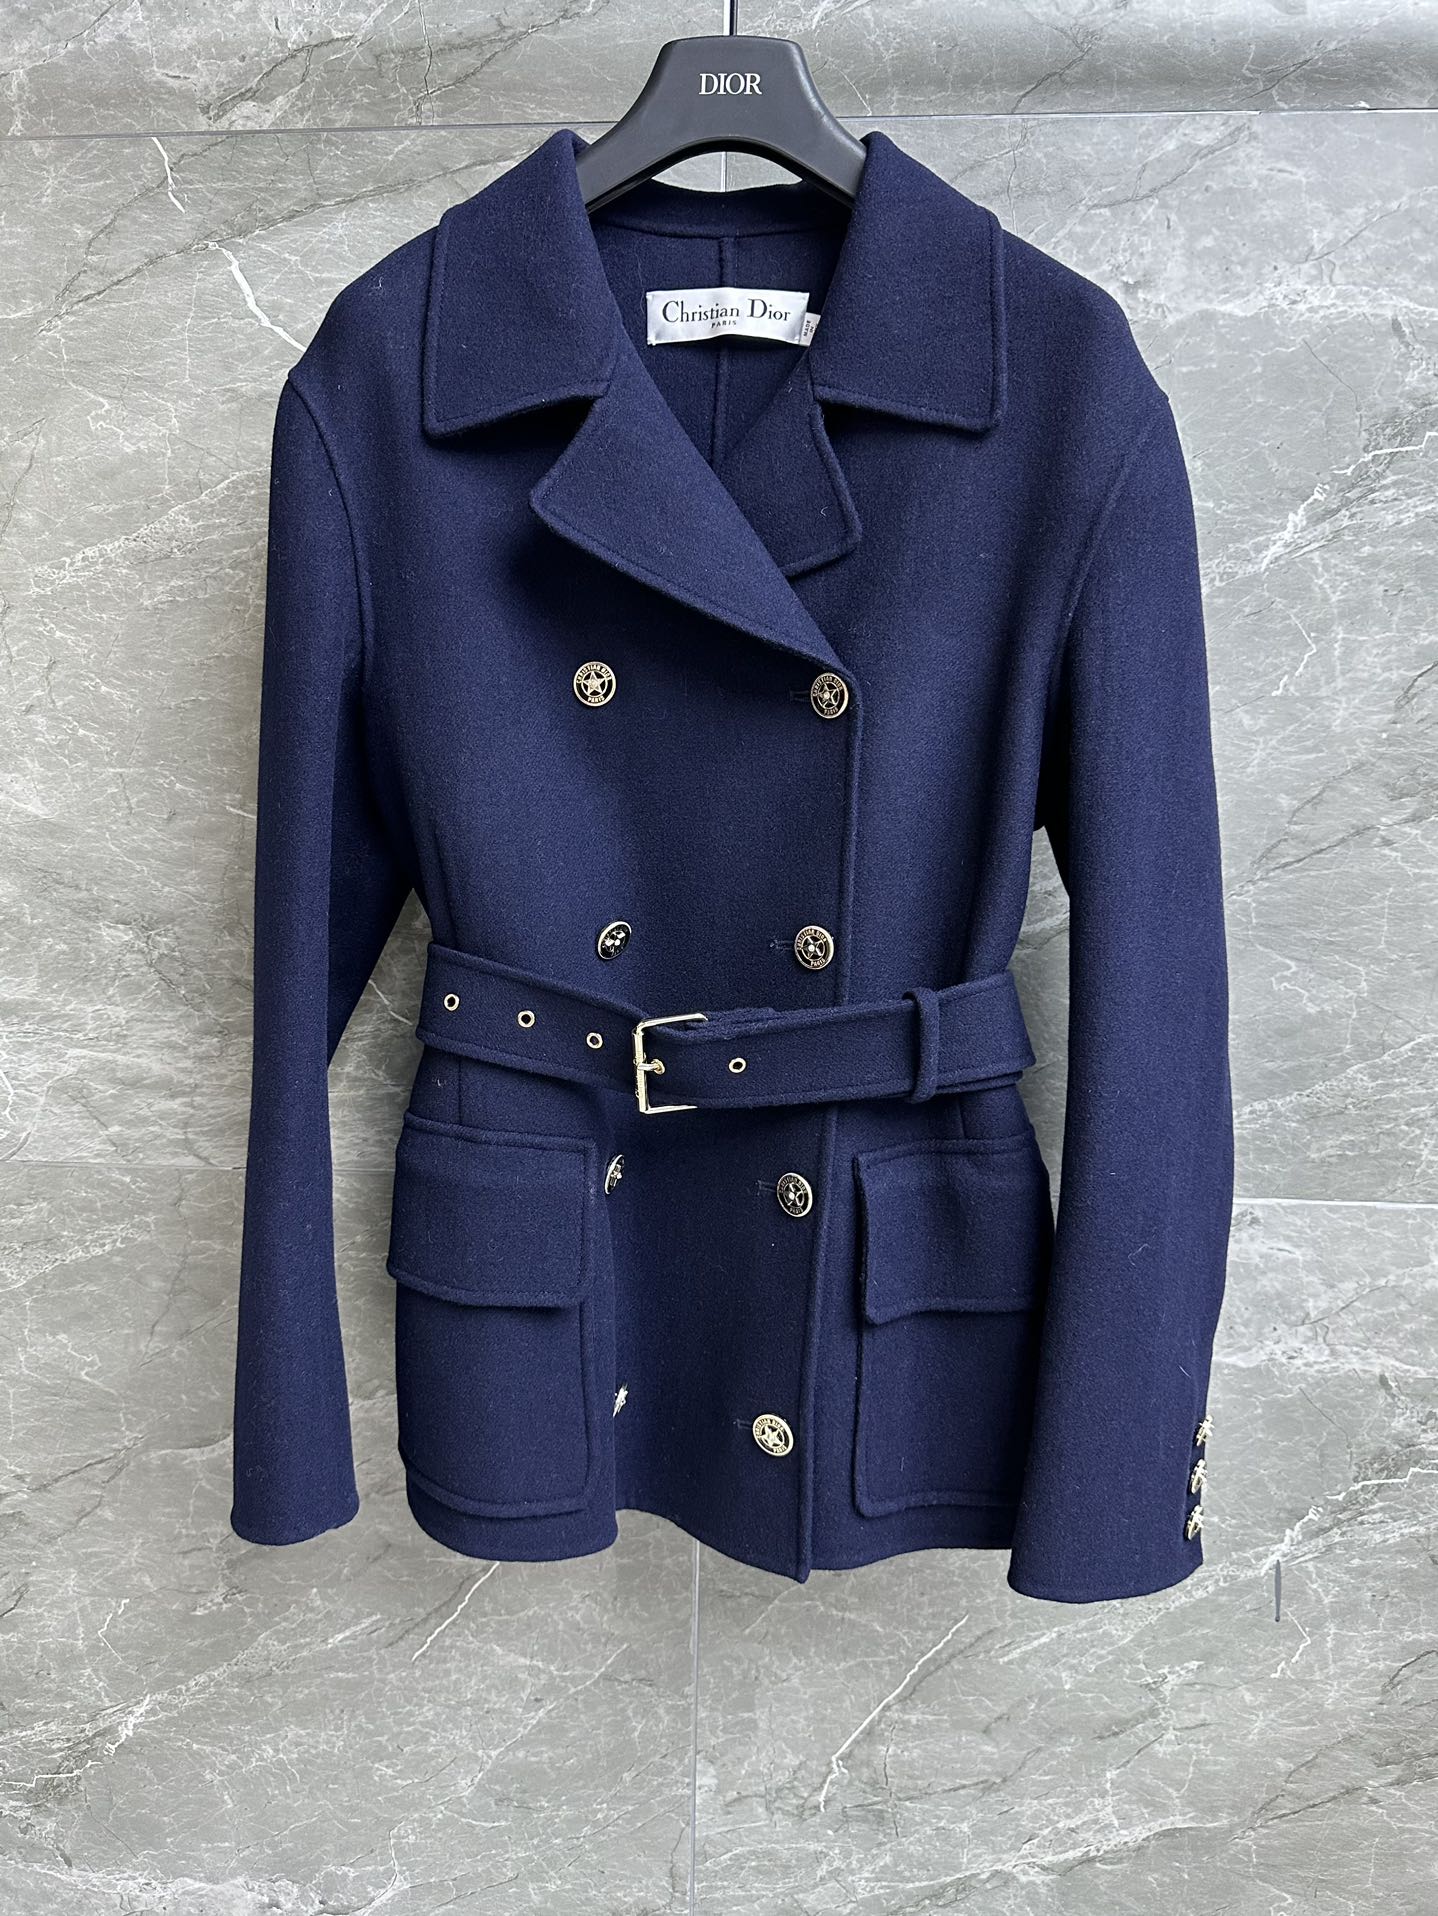 Dior Clothing Coats & Jackets Wool Fall/Winter Collection Vintage